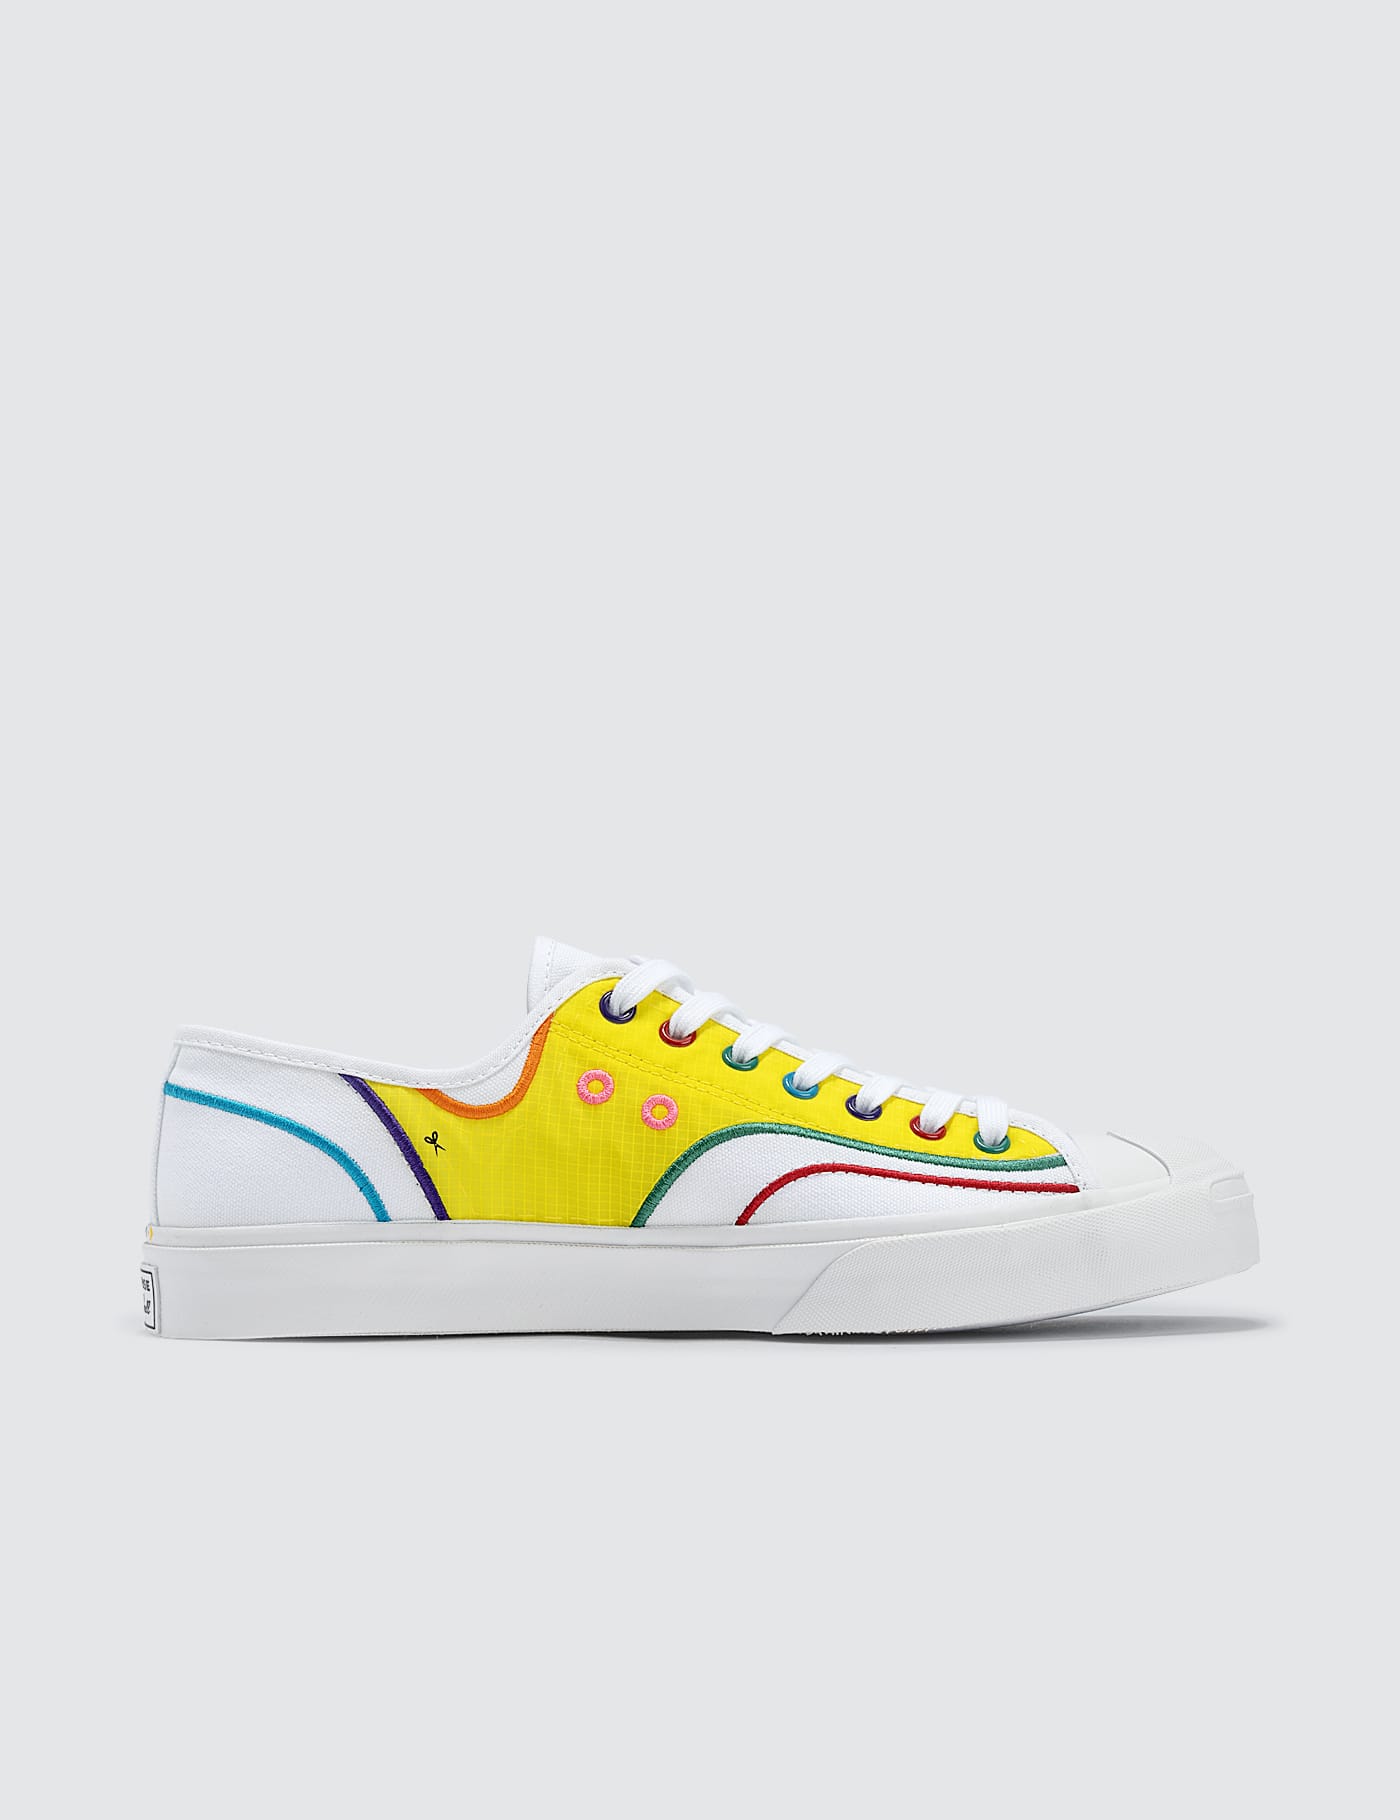 jack purcell yellow